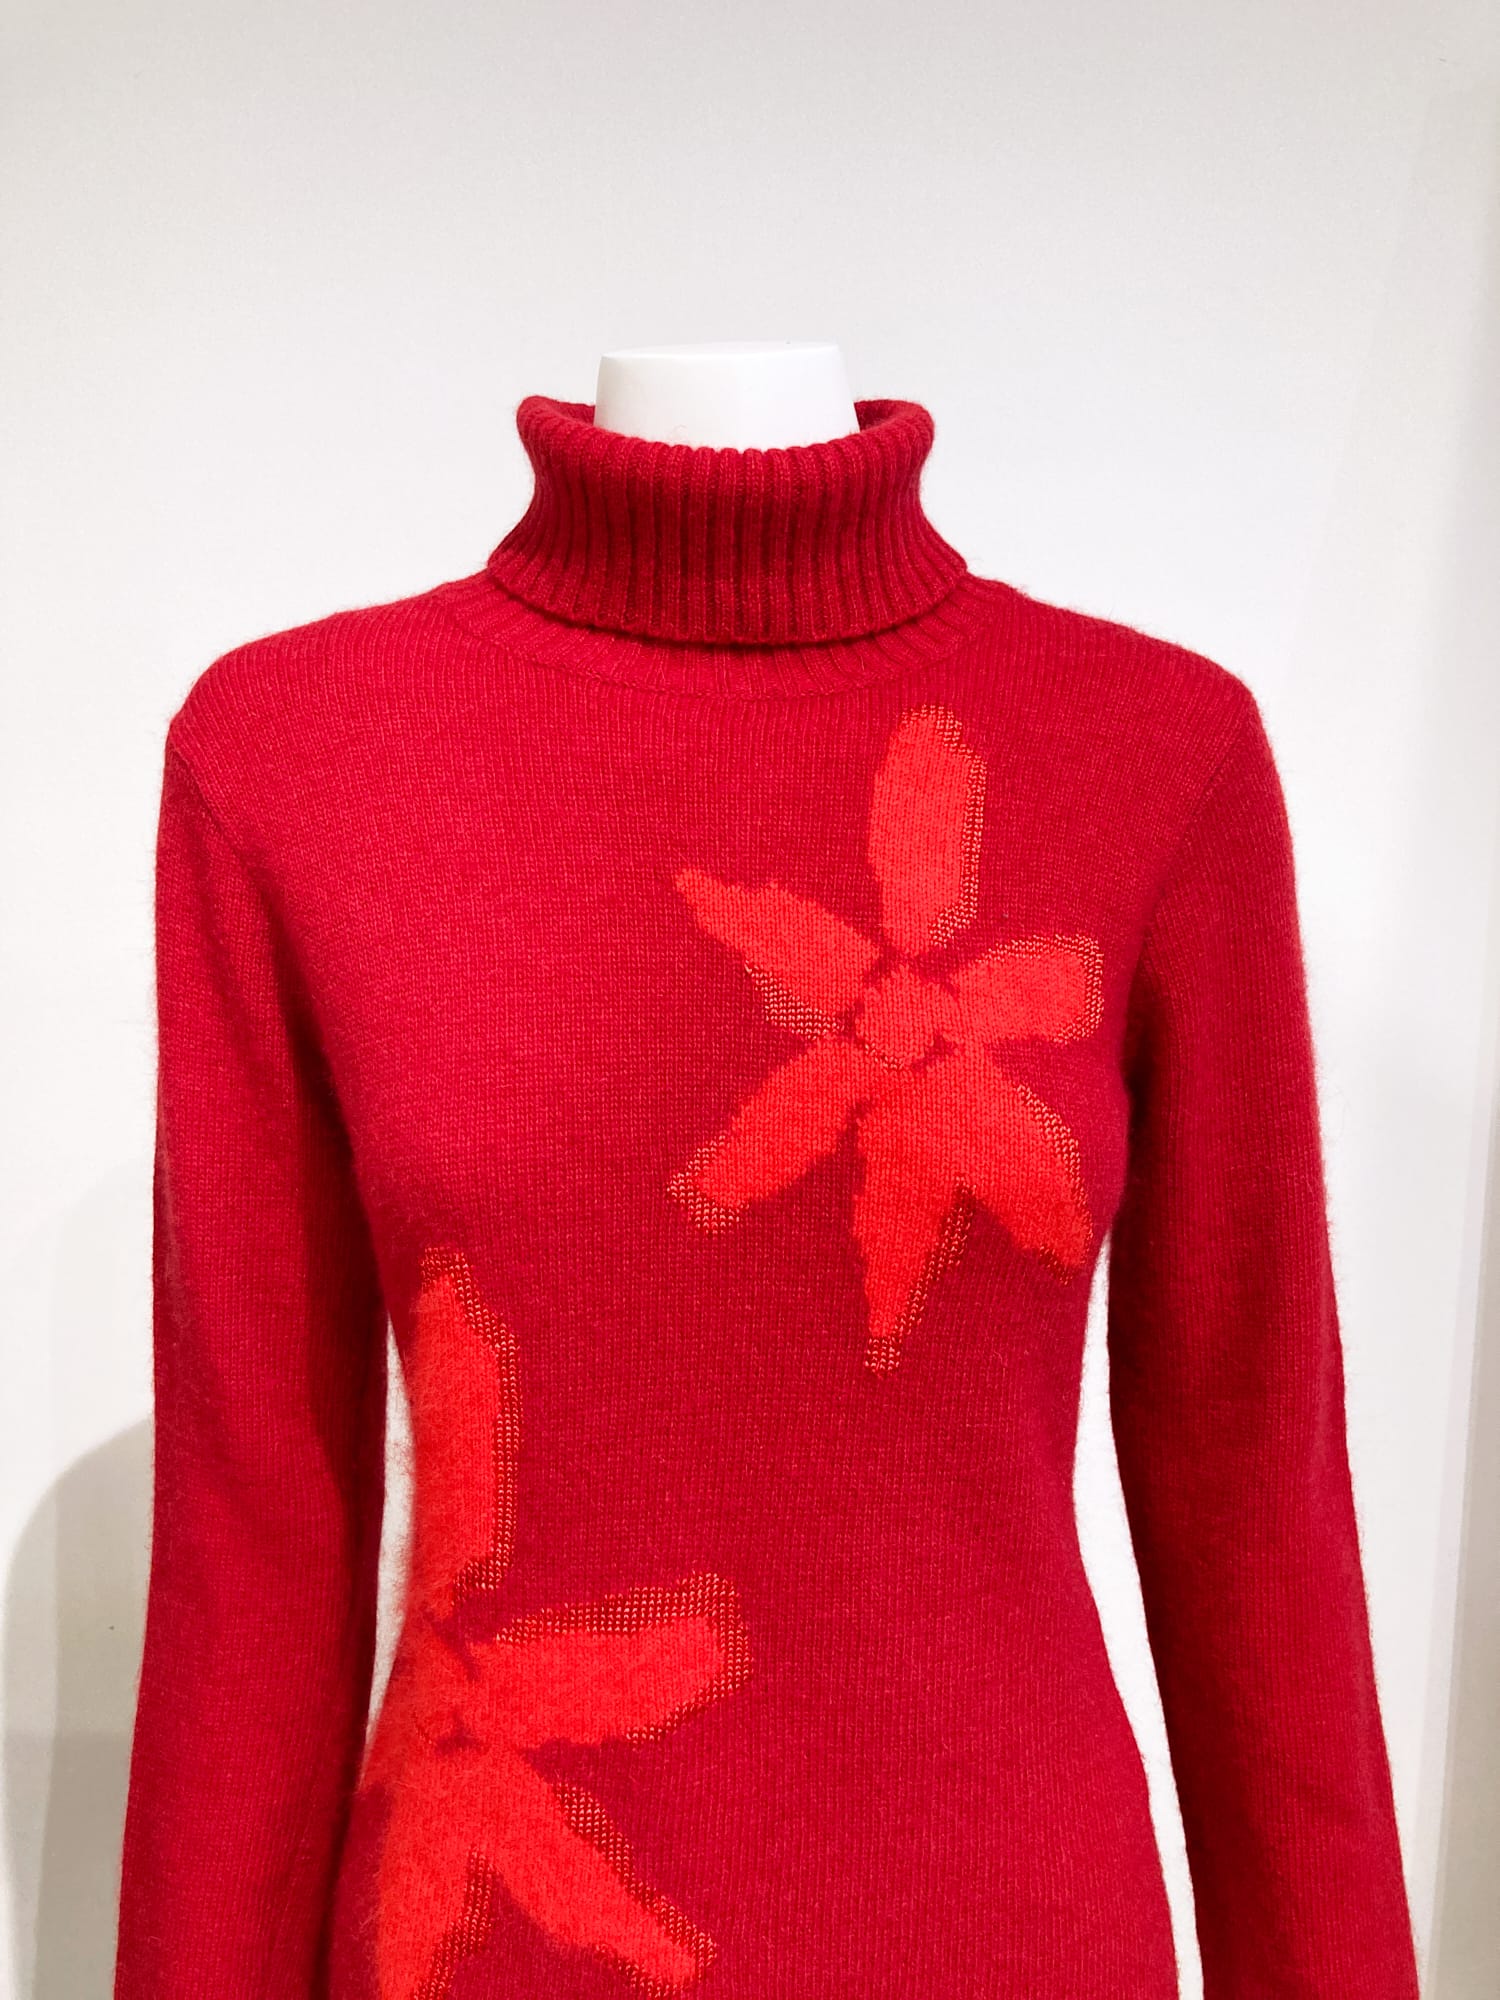 Evex by Krizia red wool turtleneck jumper with flower pattern - size 40